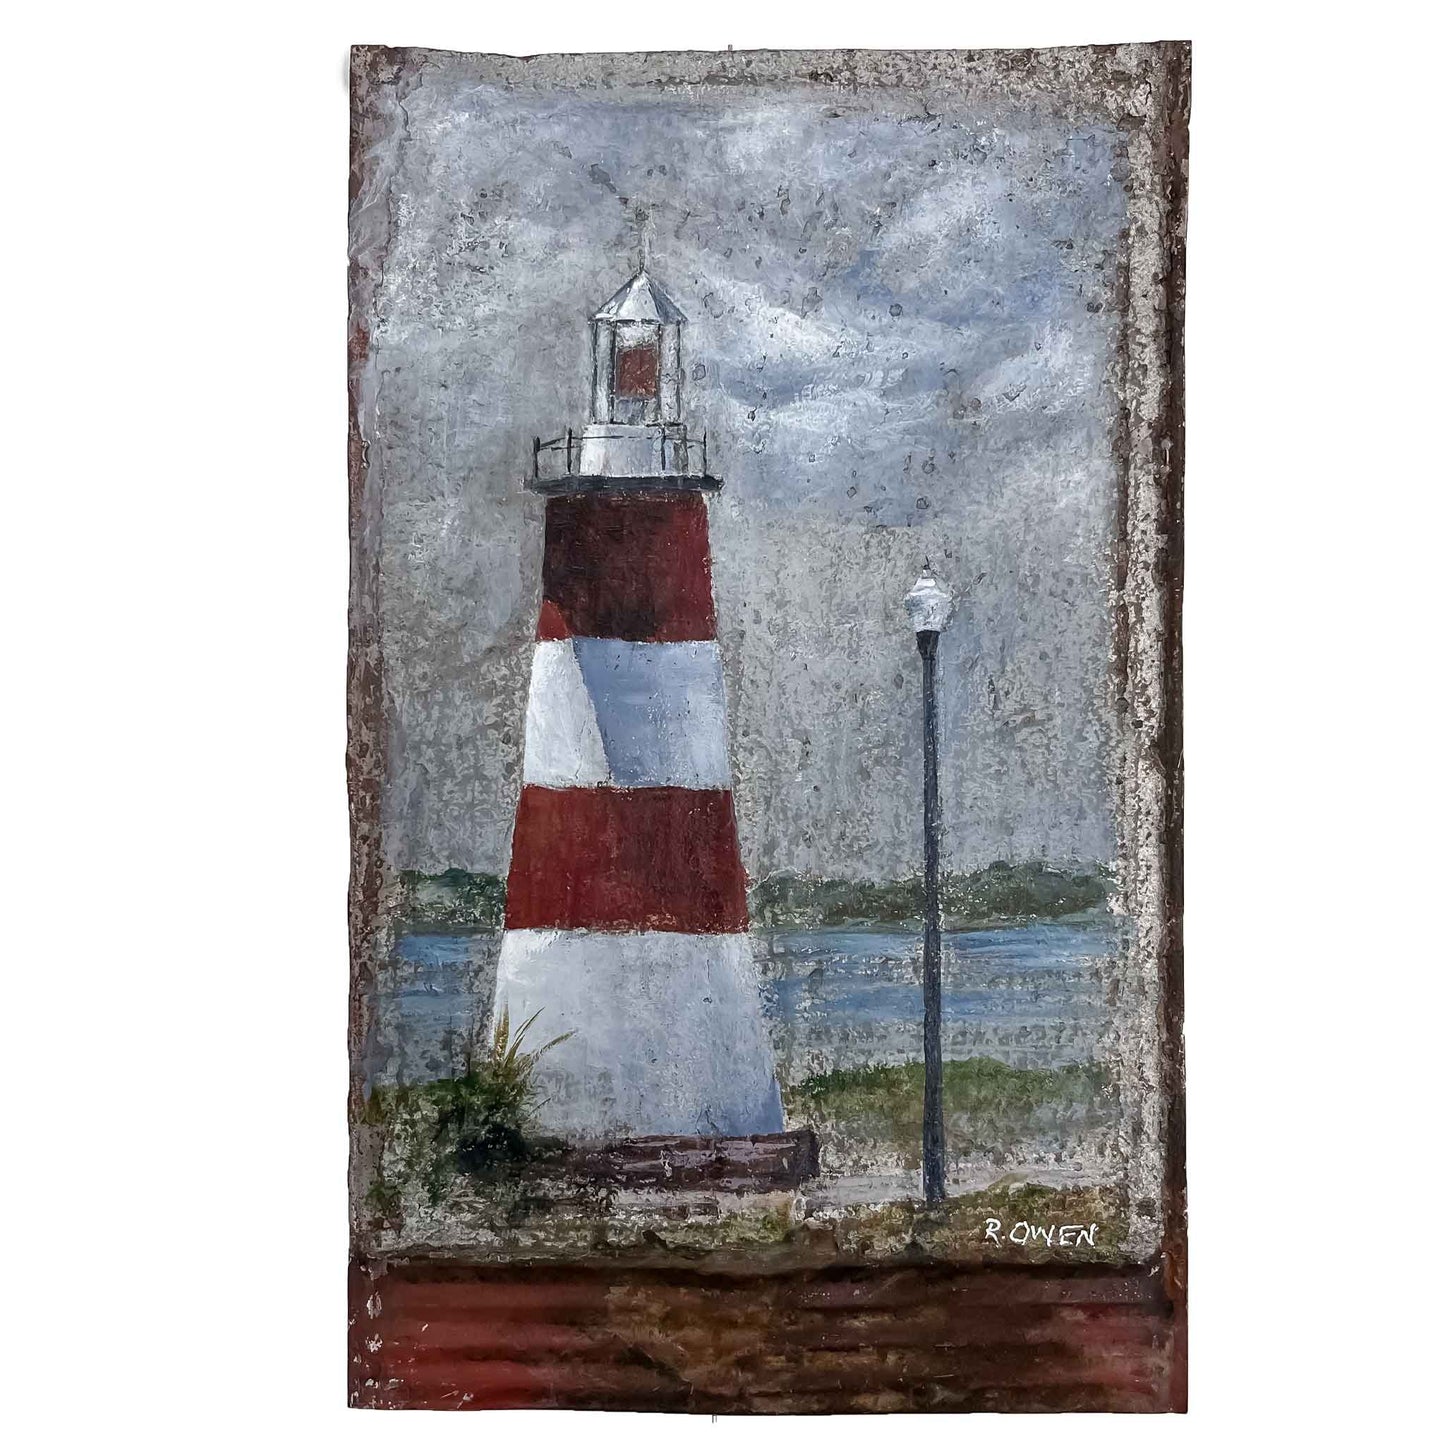 JRO A Mount Dora Landmark - The Lighthouse Painting by Renowned Artist Becky Owen. Mount Dora Lighthouse is a landmark in Mount Dora, Florida. Painted in acrylics on a vintage metal roof shingle. Stormy skies Contrast with the distinctive red and white markings on the lighthouse. Far side of Lake Dora in the background. 9 x 14 inches.